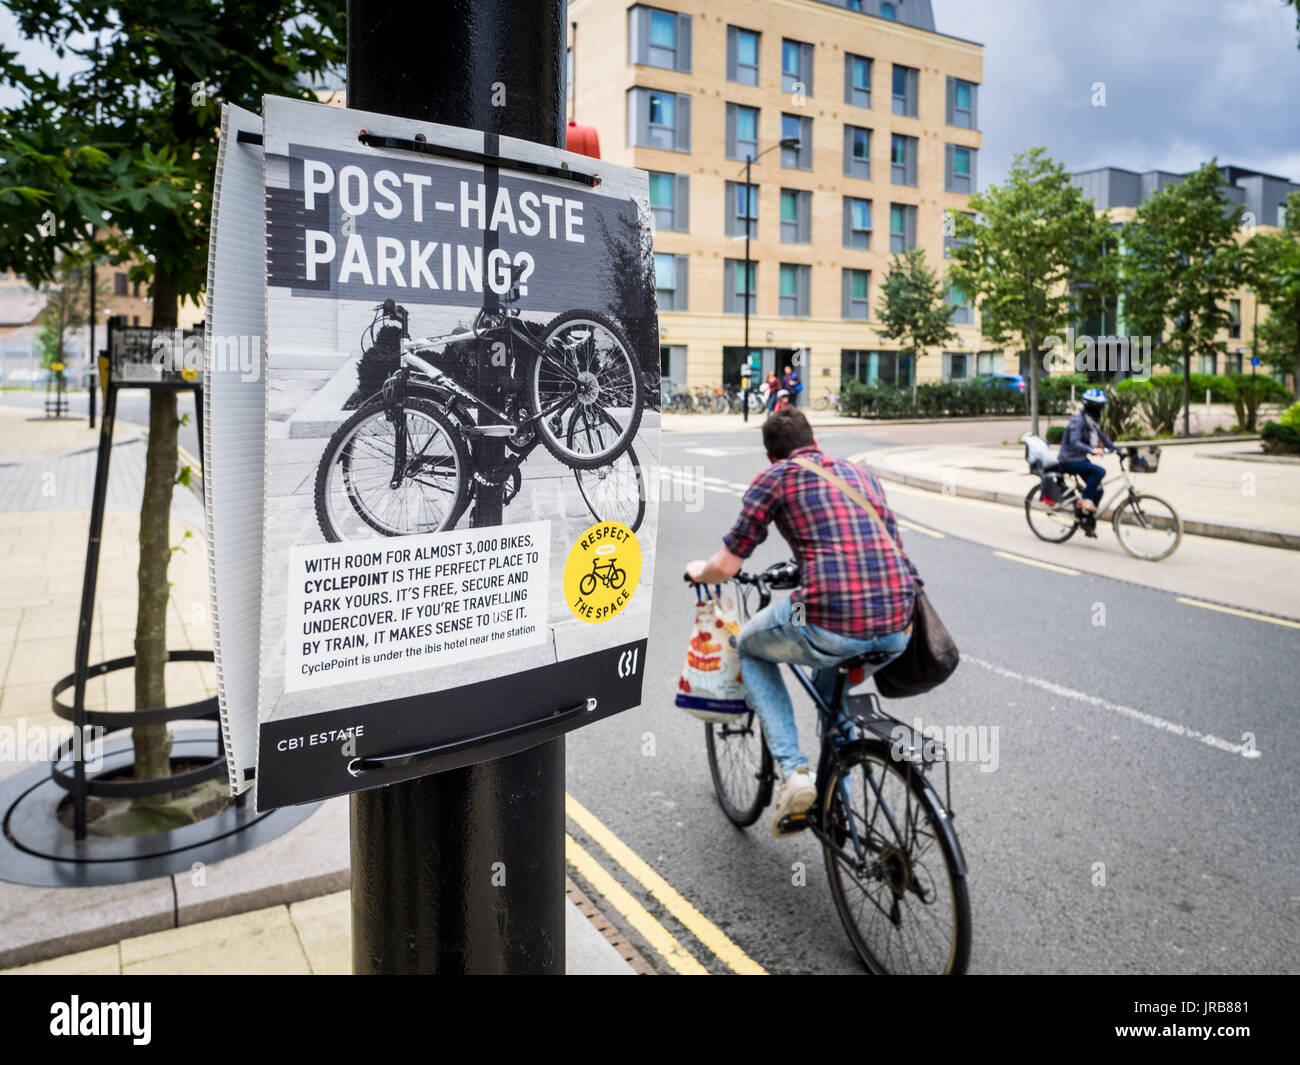 Cambridge bike congestion - Cyclists pass signs asking people not to attach bikes to street furniture, following the opening of a nearby cycle park Stock Photo